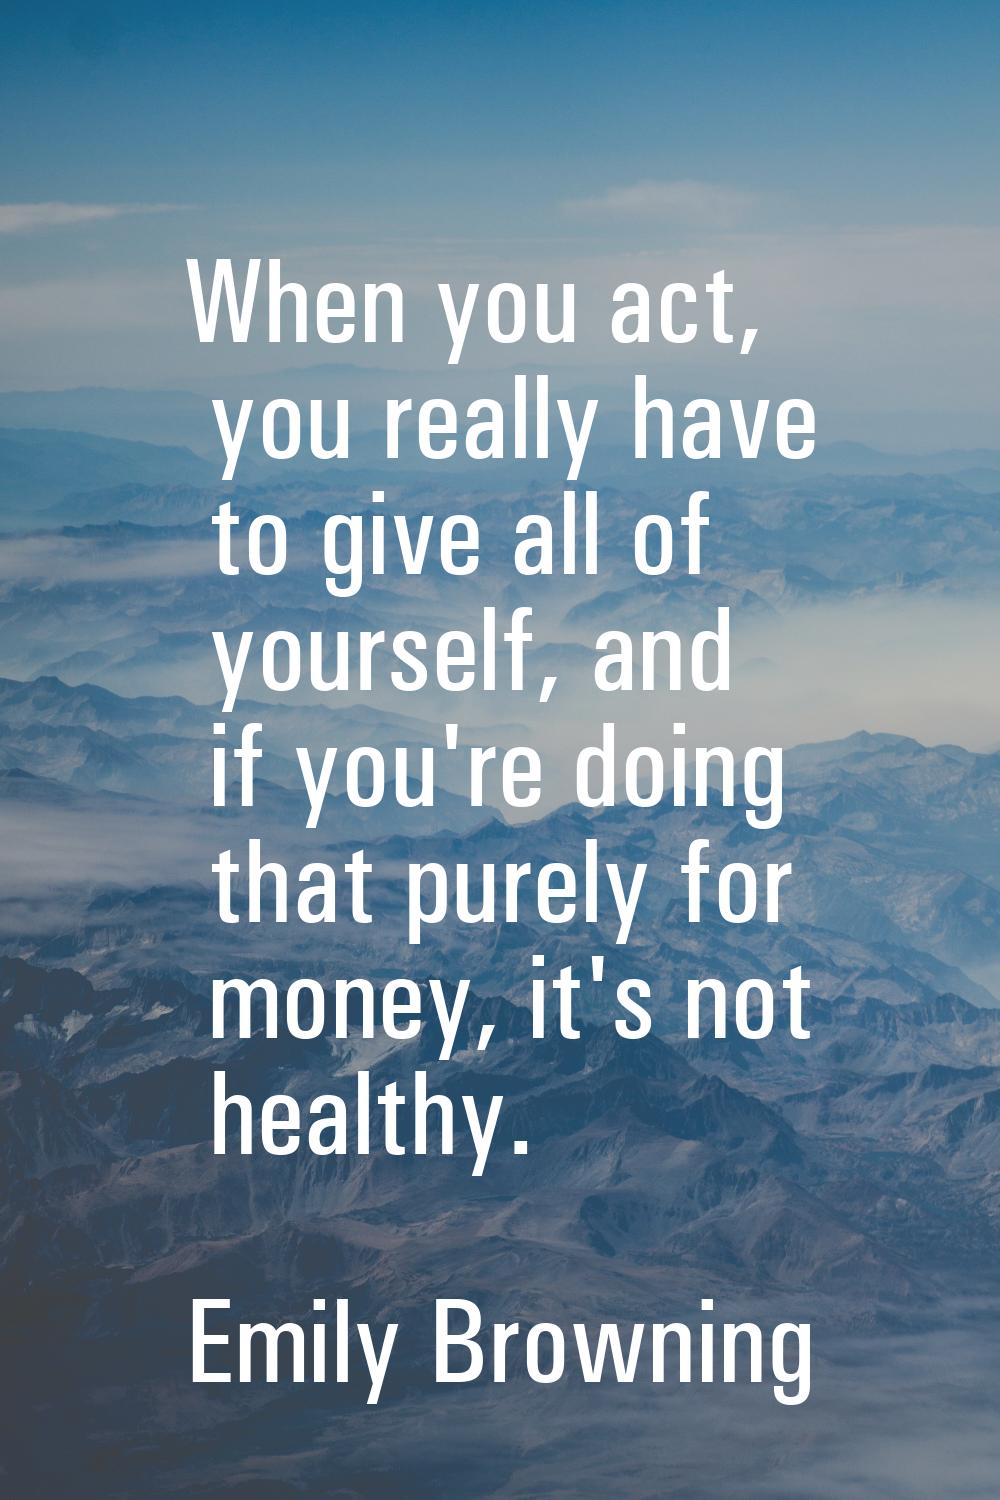 When you act, you really have to give all of yourself, and if you're doing that purely for money, i